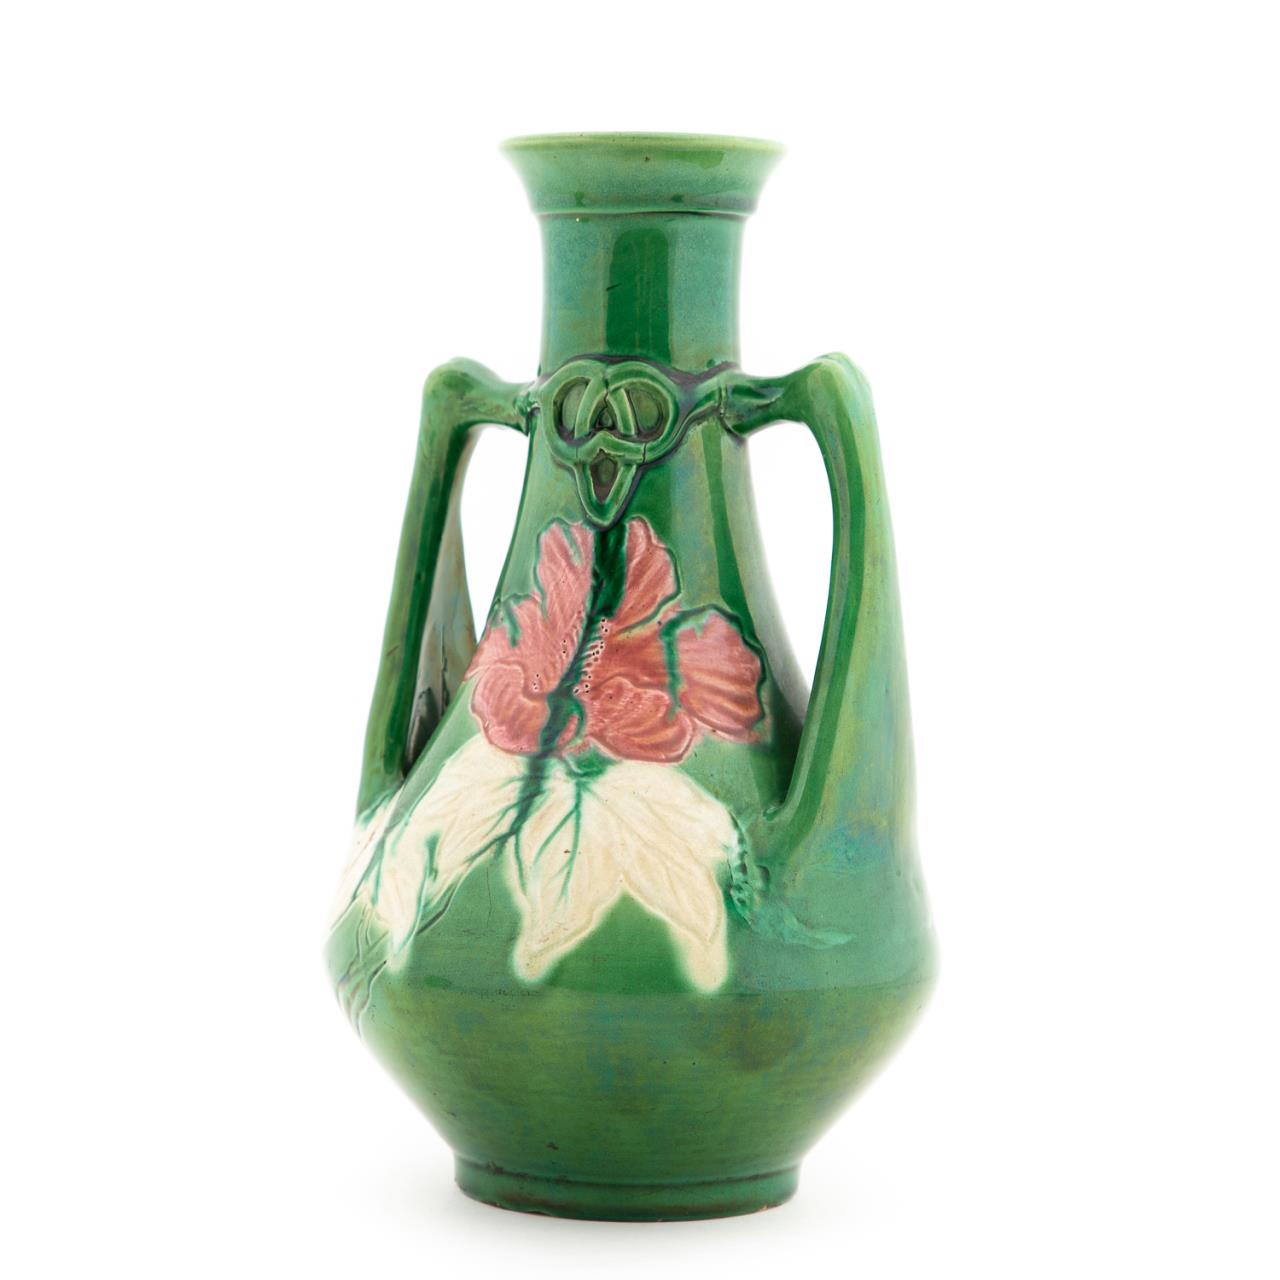 ART NOUVEAU STYLE GREEN TWO HANDLED